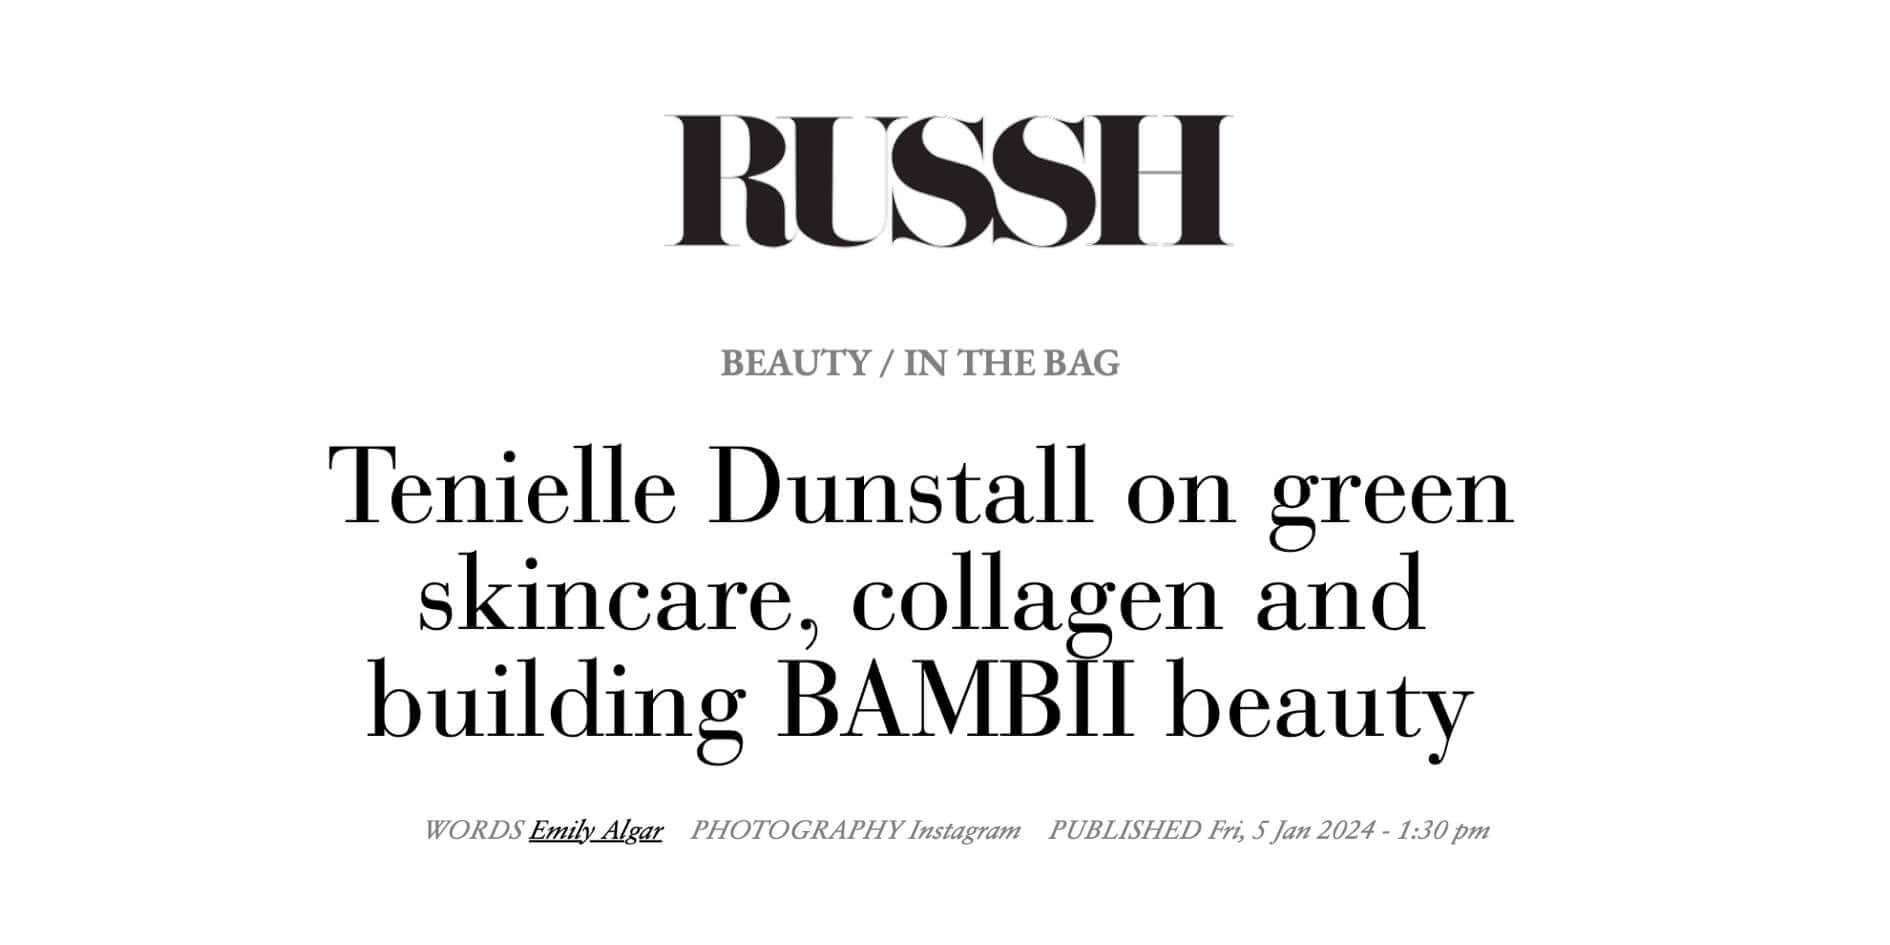 Rush Magazine grew skincare collagen and building natural clean BAMBII beauty